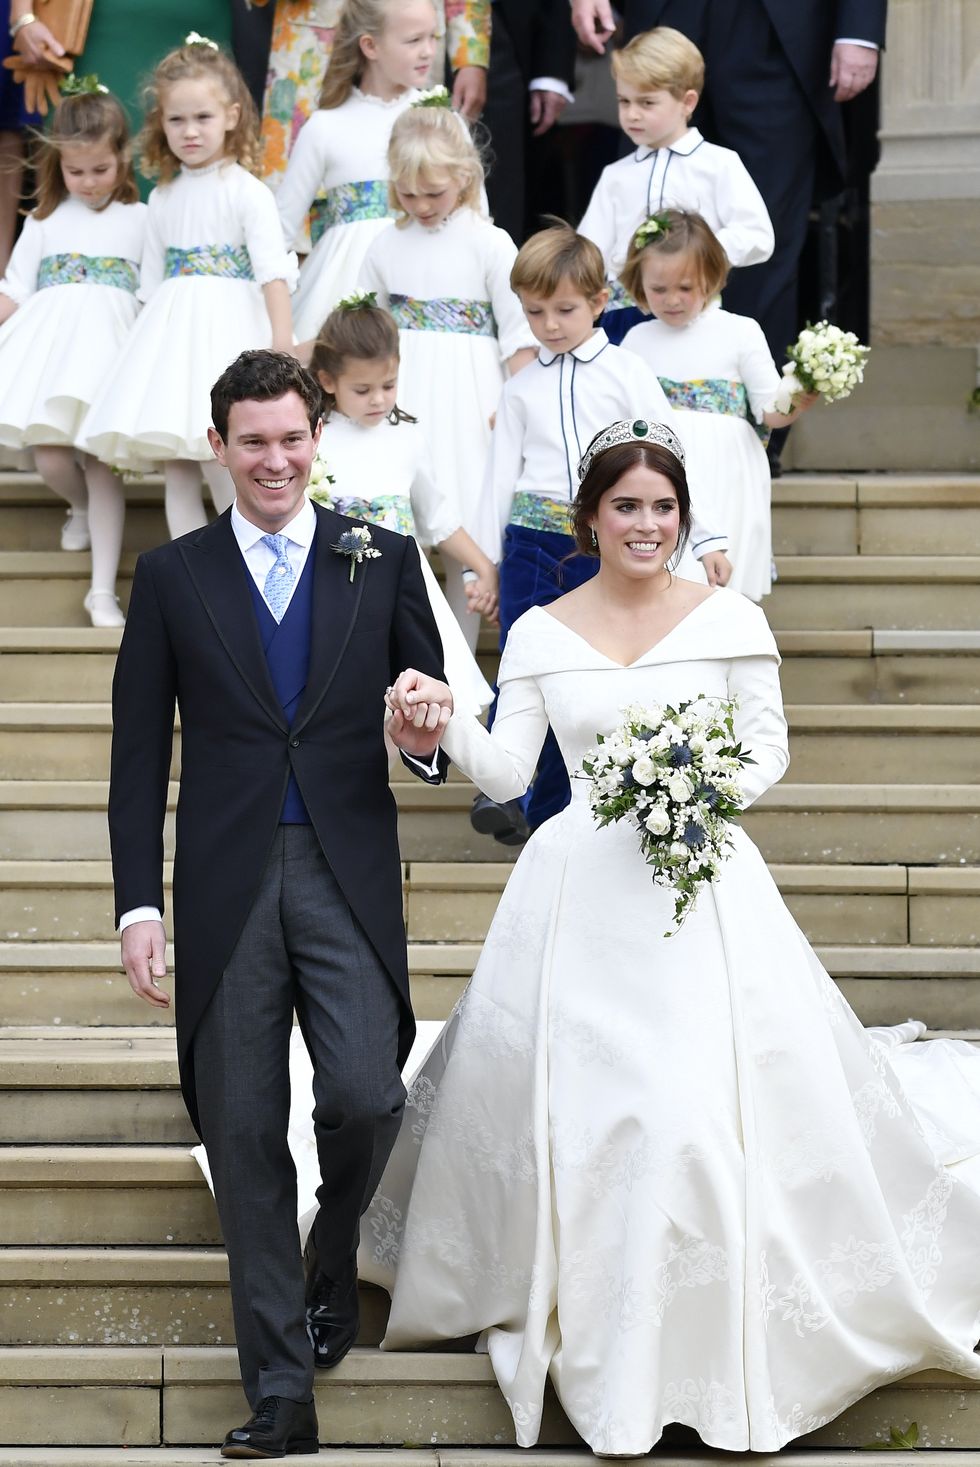 50 Iconic Celebrity Wedding Dresses - Most Memorable Wedding Gowns in  History